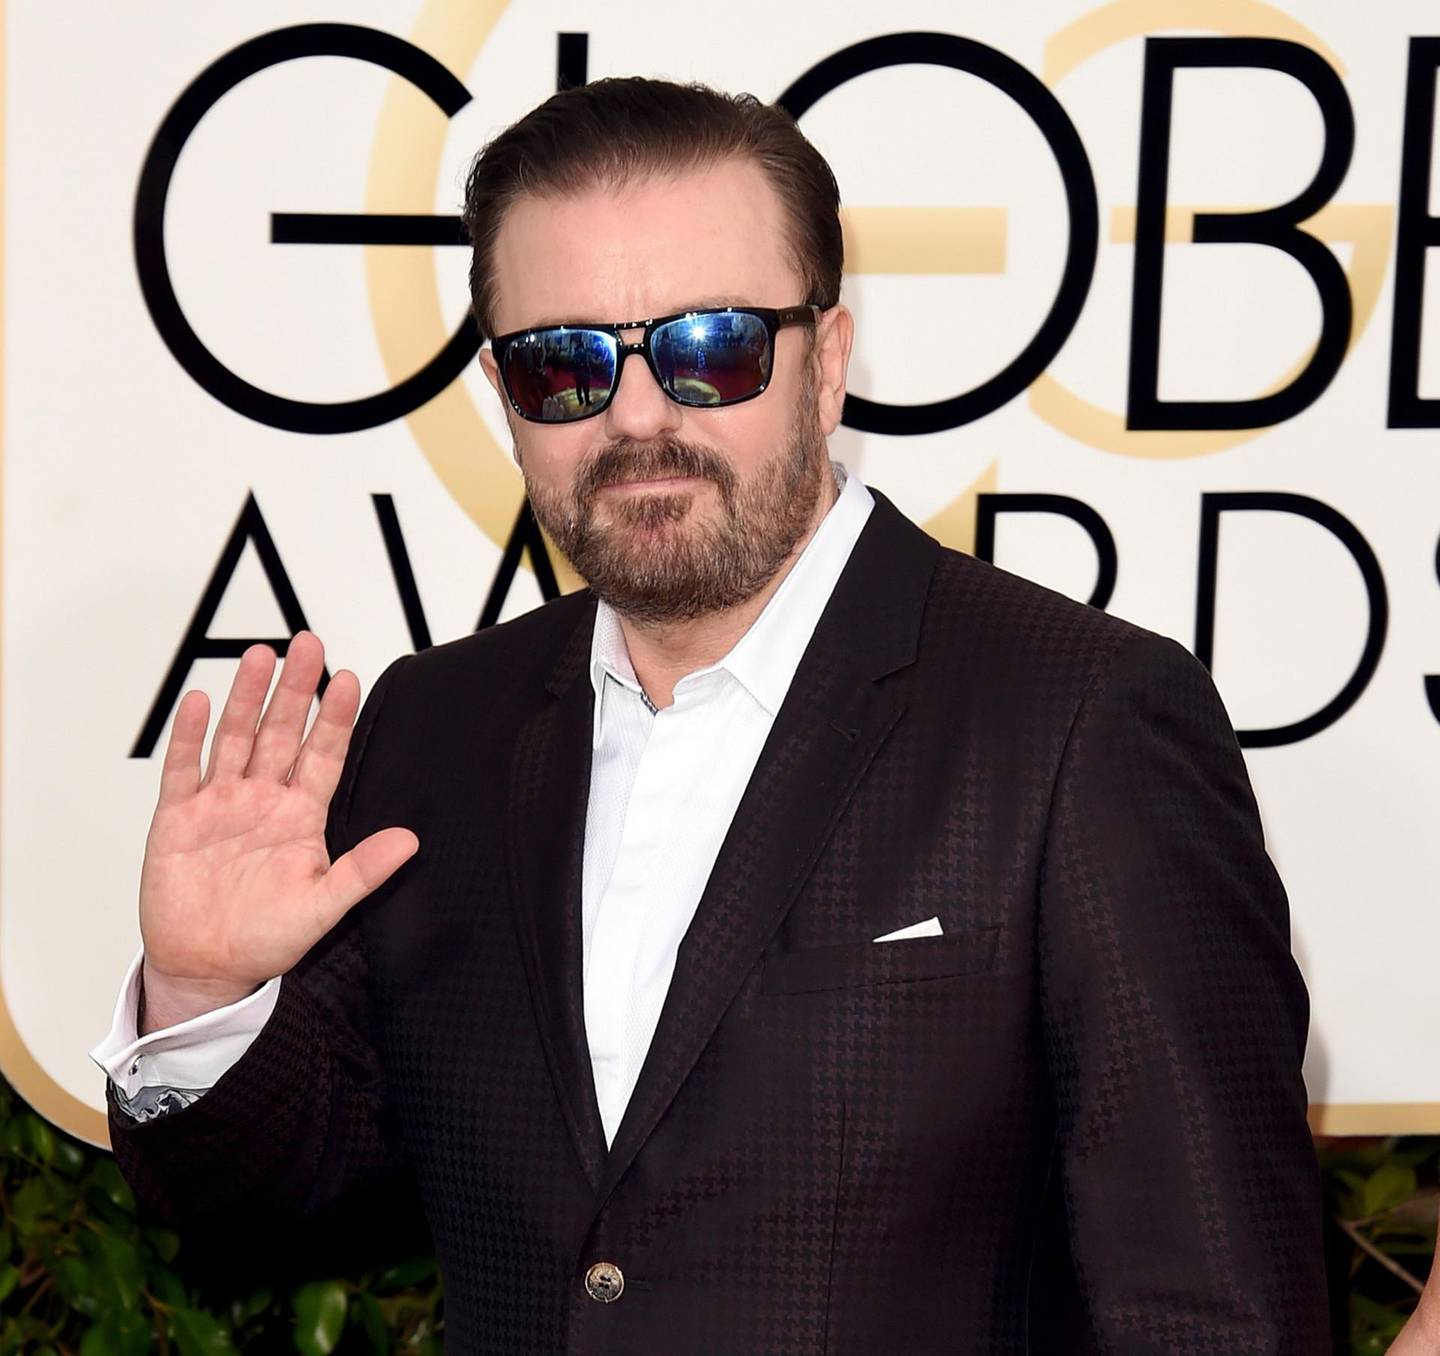 (FILES) In this file photo taken on January 10, 2016, host Ricky Gervais attends the 73rd Annual Golden Globe Awards in Beverly Hills, California.    "Shut up, you disgusting, pill-popping deviant scum!" Those were the words Gervais used to open the star-studded Golden Globes in 2016 -- the last time he hosted Hollywood's most free-wheeling award show. So A-listers in the audience will be on their guard Sunday, when the provocative British comic returns to oversee the boozy prize-giving gala for "the very last time." Gervais' no-holds-barred humor has drawn praise and criticism in previous years, with everyone from Caitlyn Jenner to Roman Polanski considered fair targets for his sharp barbs. / AFP / GETTY IMAGES NORTH AMERICA / Jason Merritt / TO GO WITH AFP STORY by Andrew MARSZAL, "Gervais back to roast Hollywood in 'final' Globes role"
